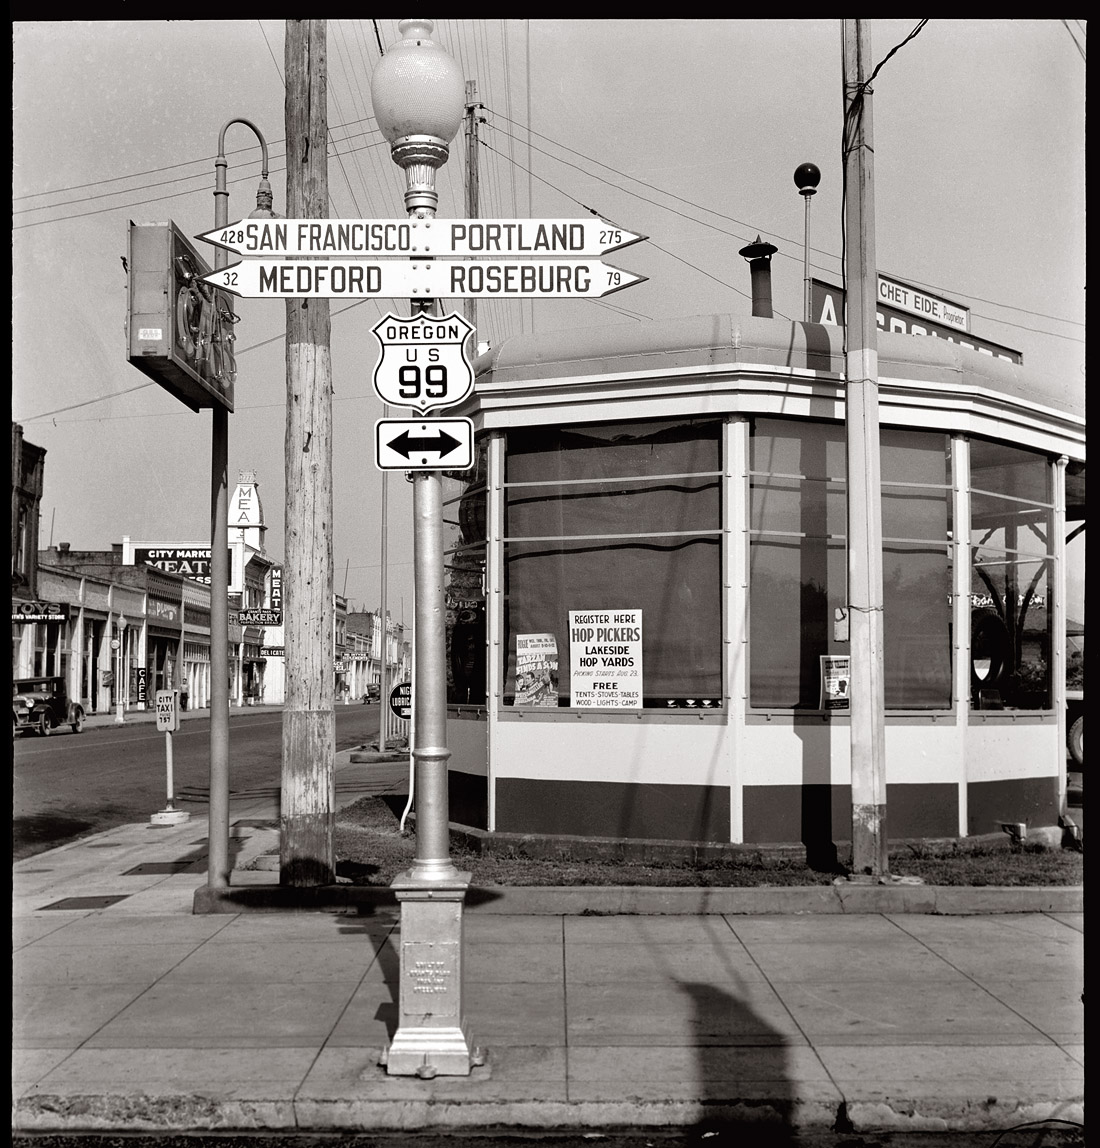 U.S. 99 in Josephine County, Oregon. August 1939. Sign in service station window advertising for hop pickers three weeks before opening season. View full size. Photograph by Dorothea Lange. What city is this? [Answer: Grants Pass]